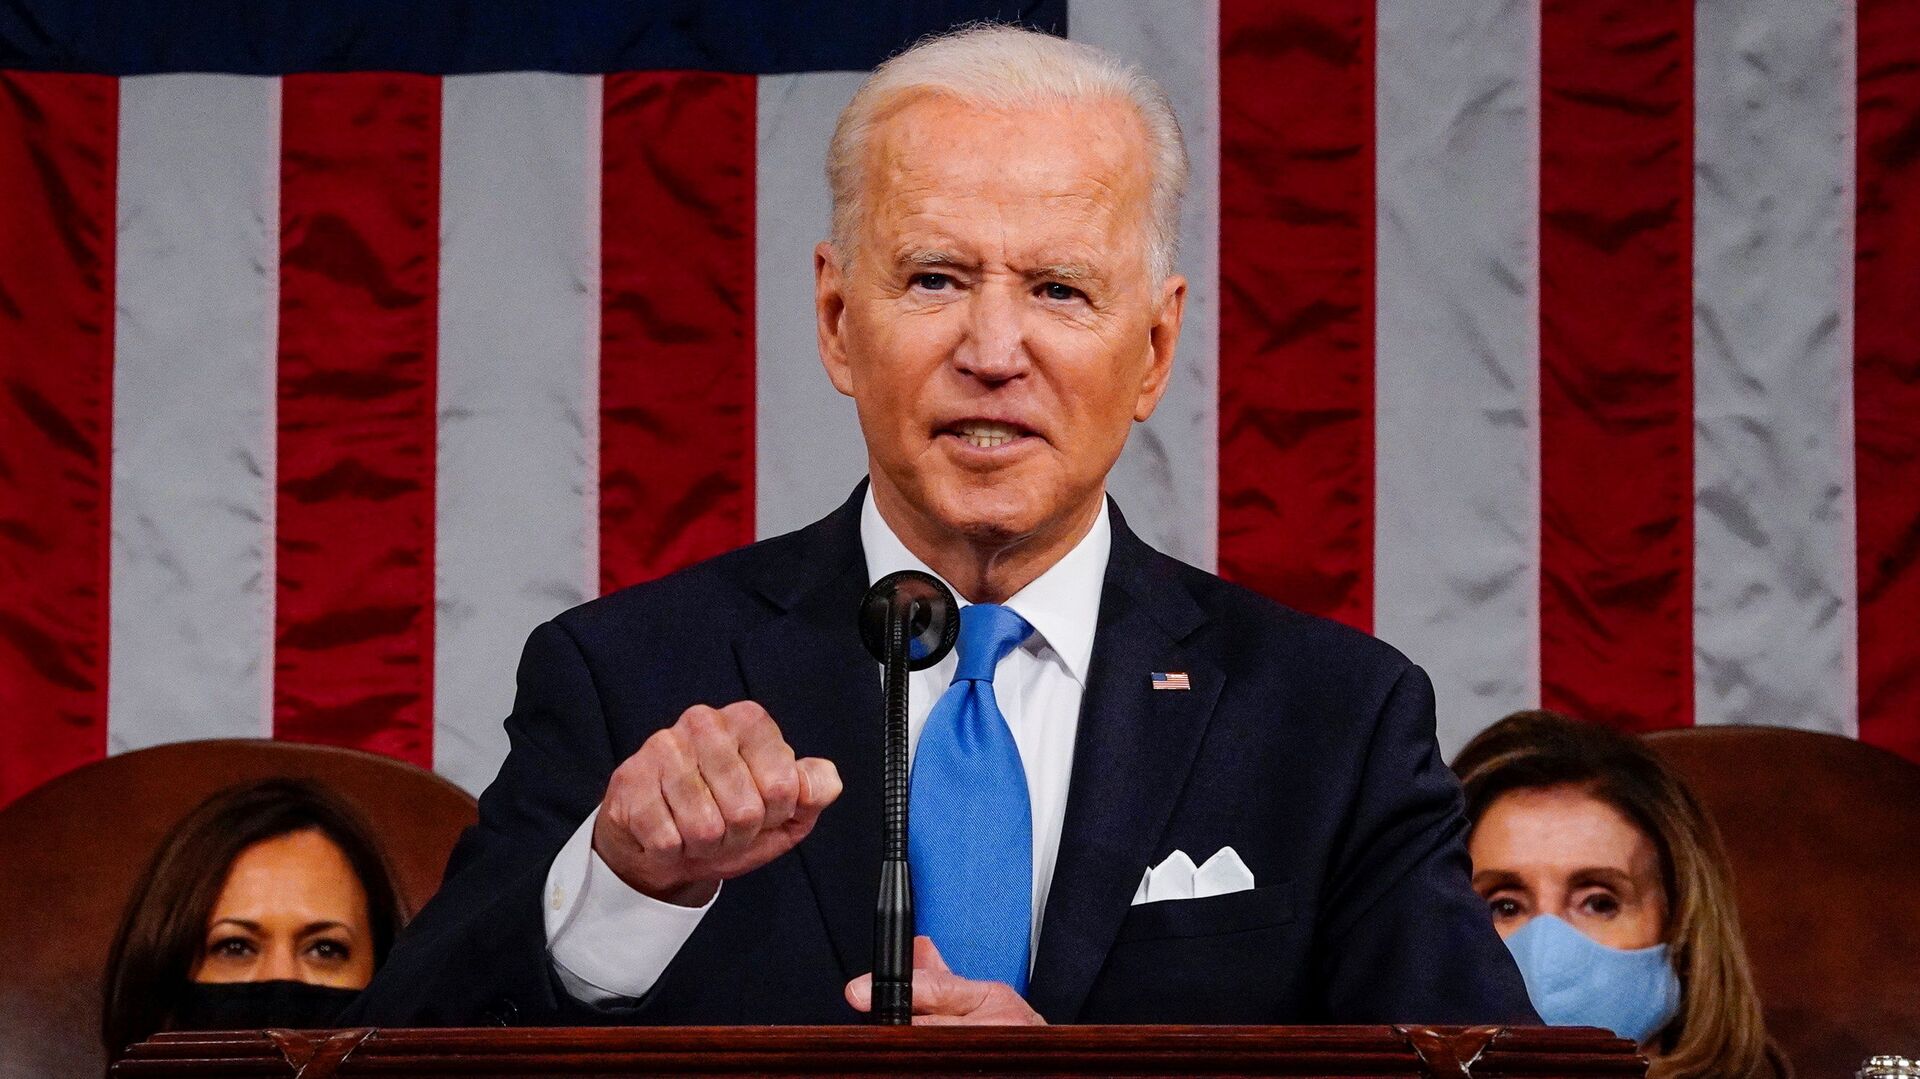 US President Joe Biden addresses to a joint session of Congress in the House chamber of the US Capitol in Washington, US, April 28, 2021 - Sputnik International, 1920, 02.06.2021